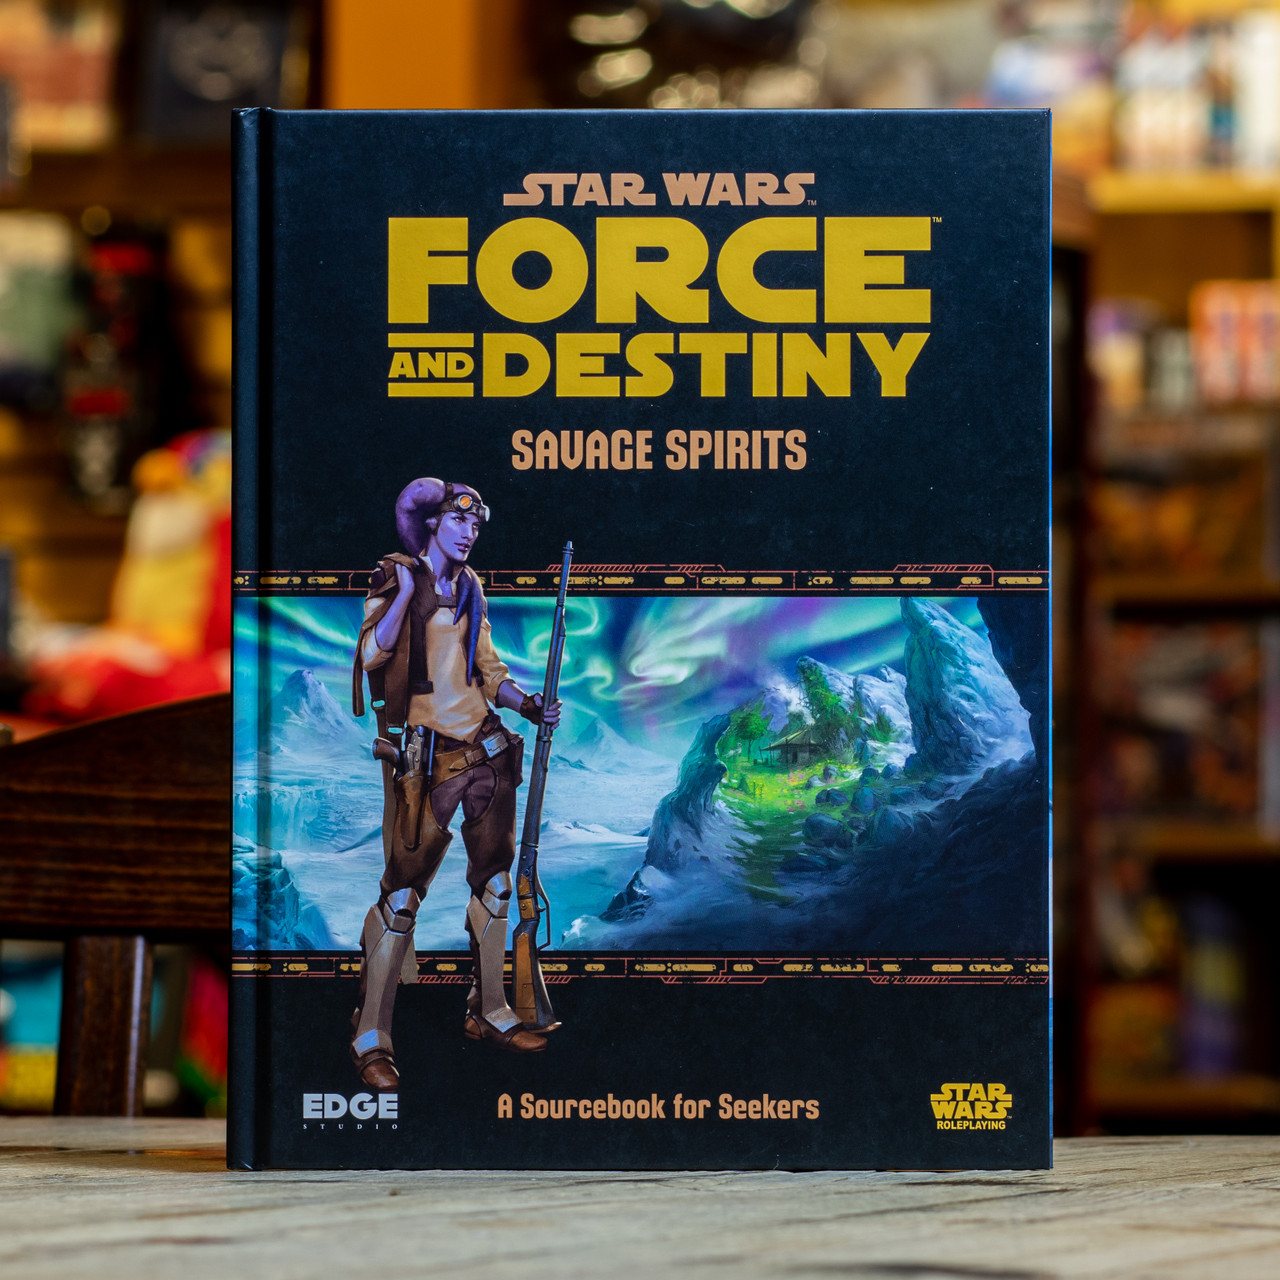 Star Wars RPG: Force and Destiny - Nexus of Power Hardcover